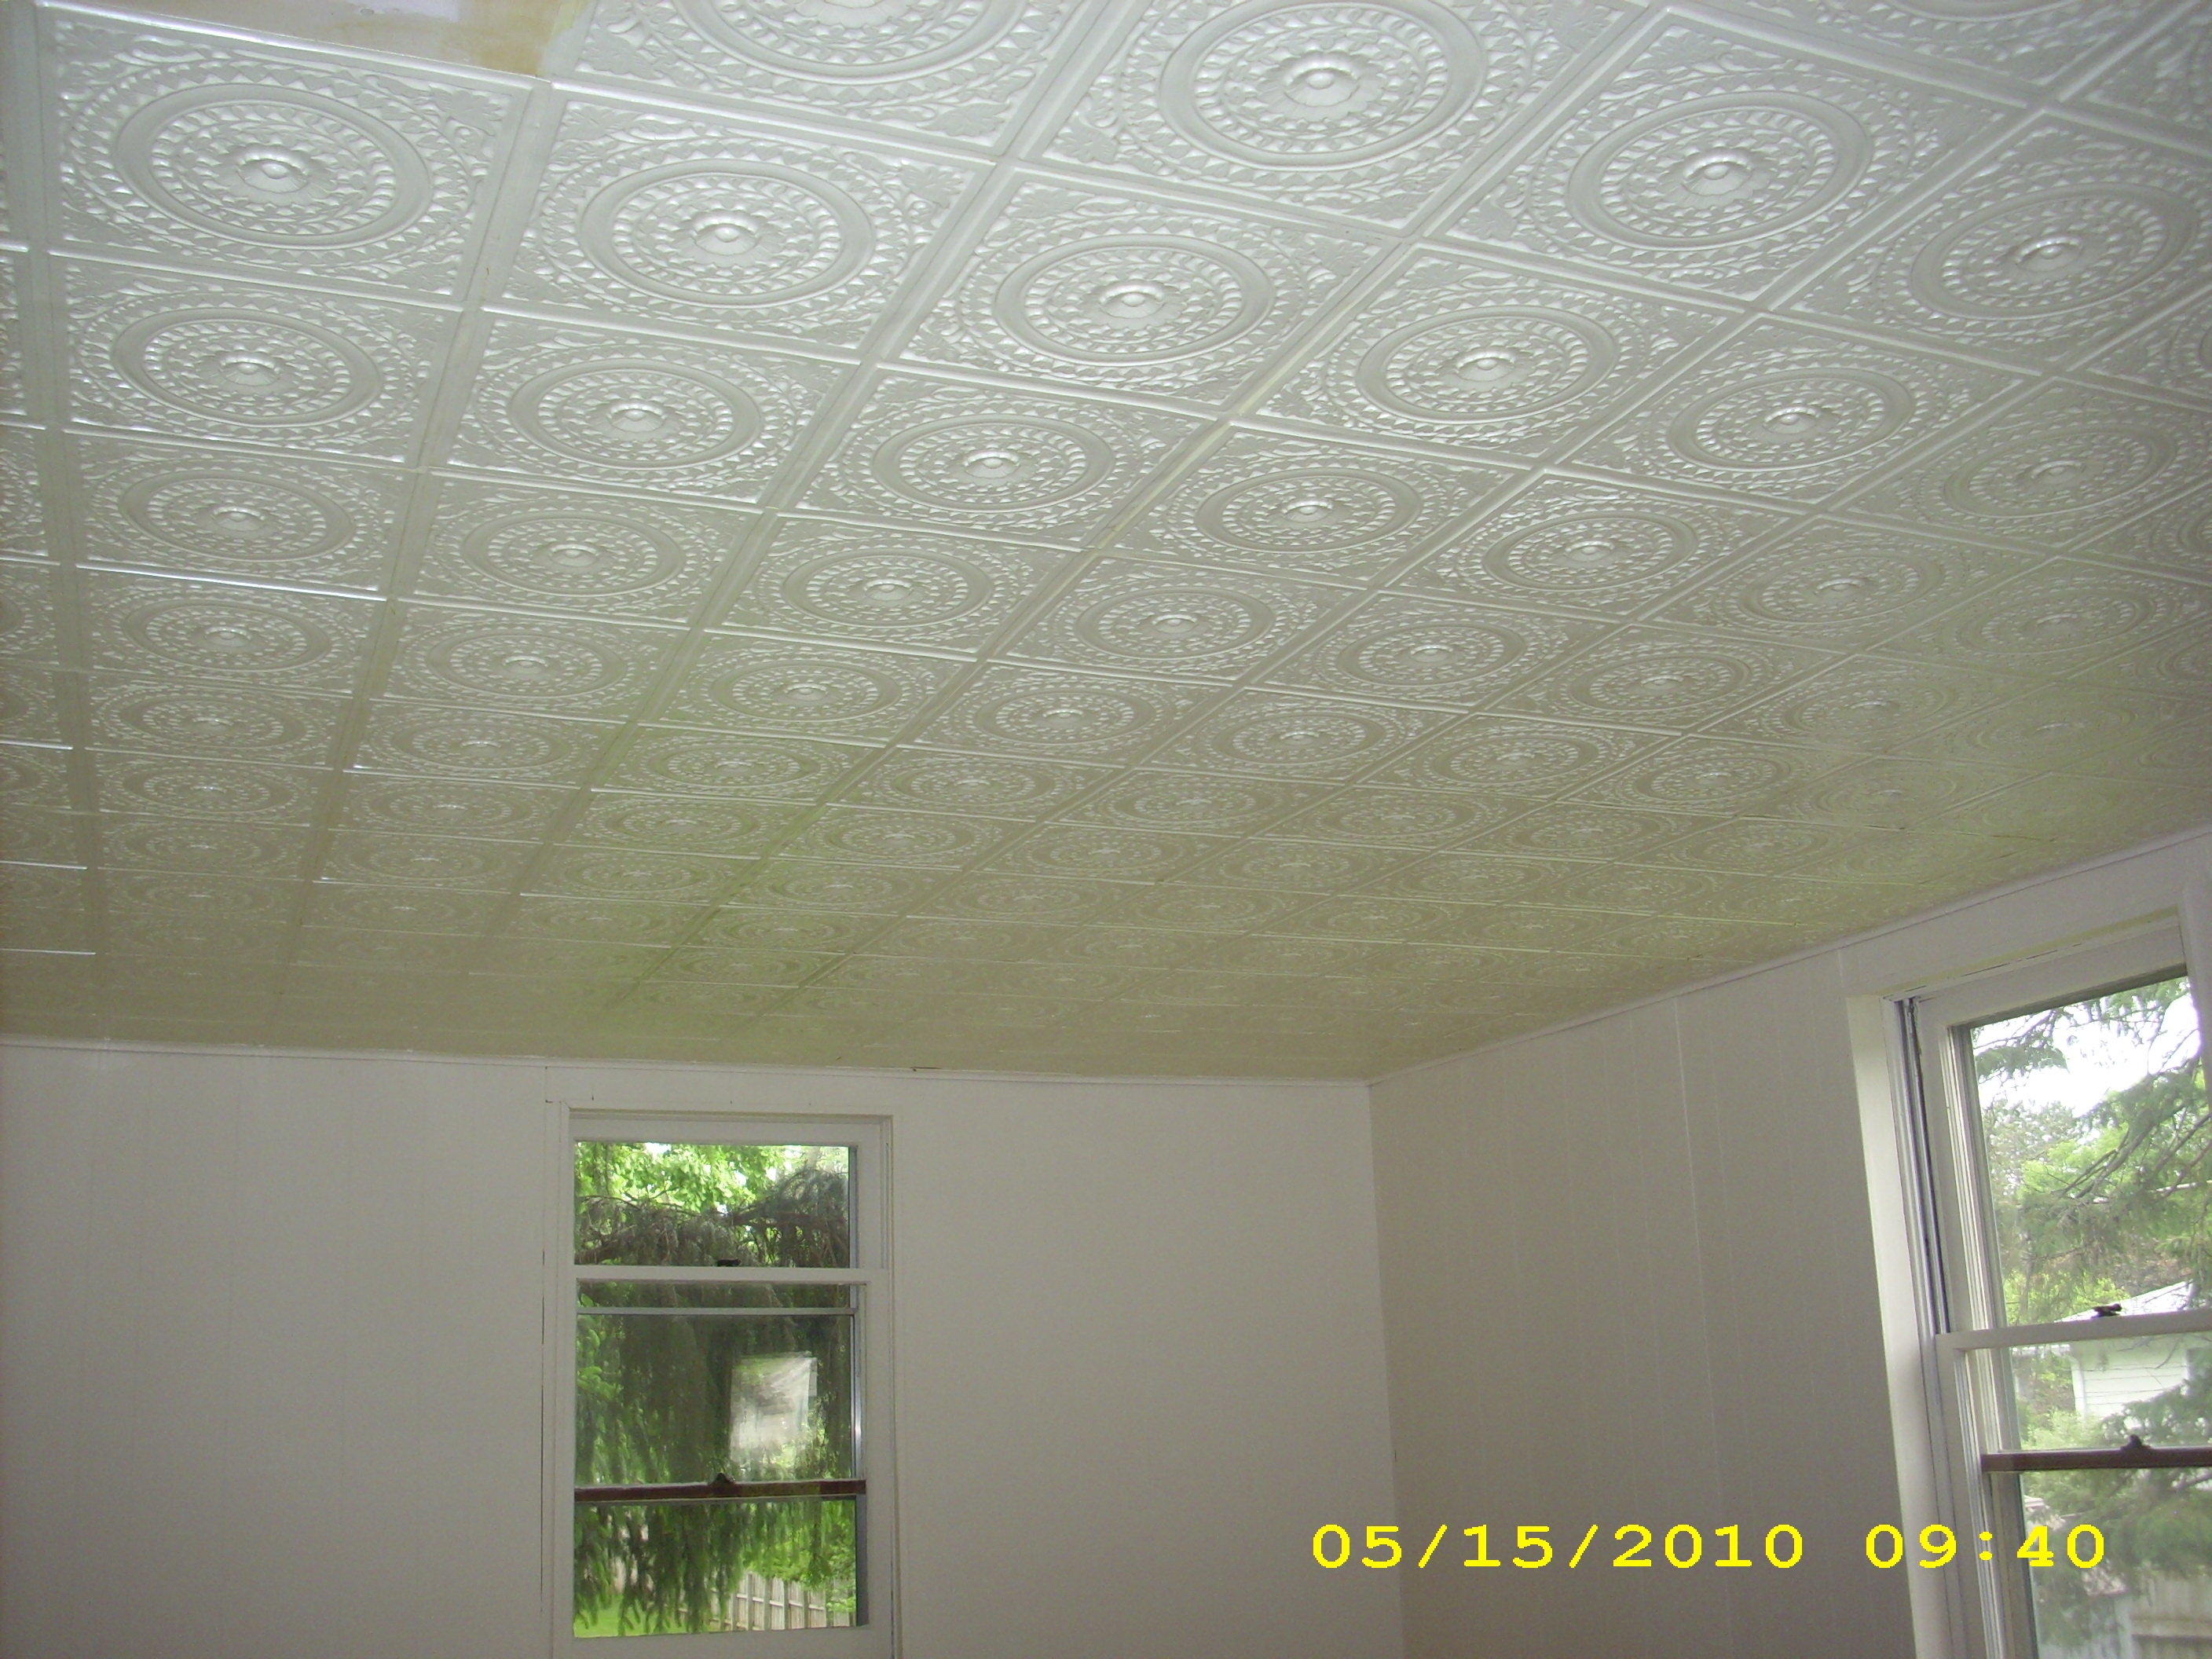 Decorating Ideas For Ceiling Tilesdecor faux tin ceiling tiles design ideas with white wall also